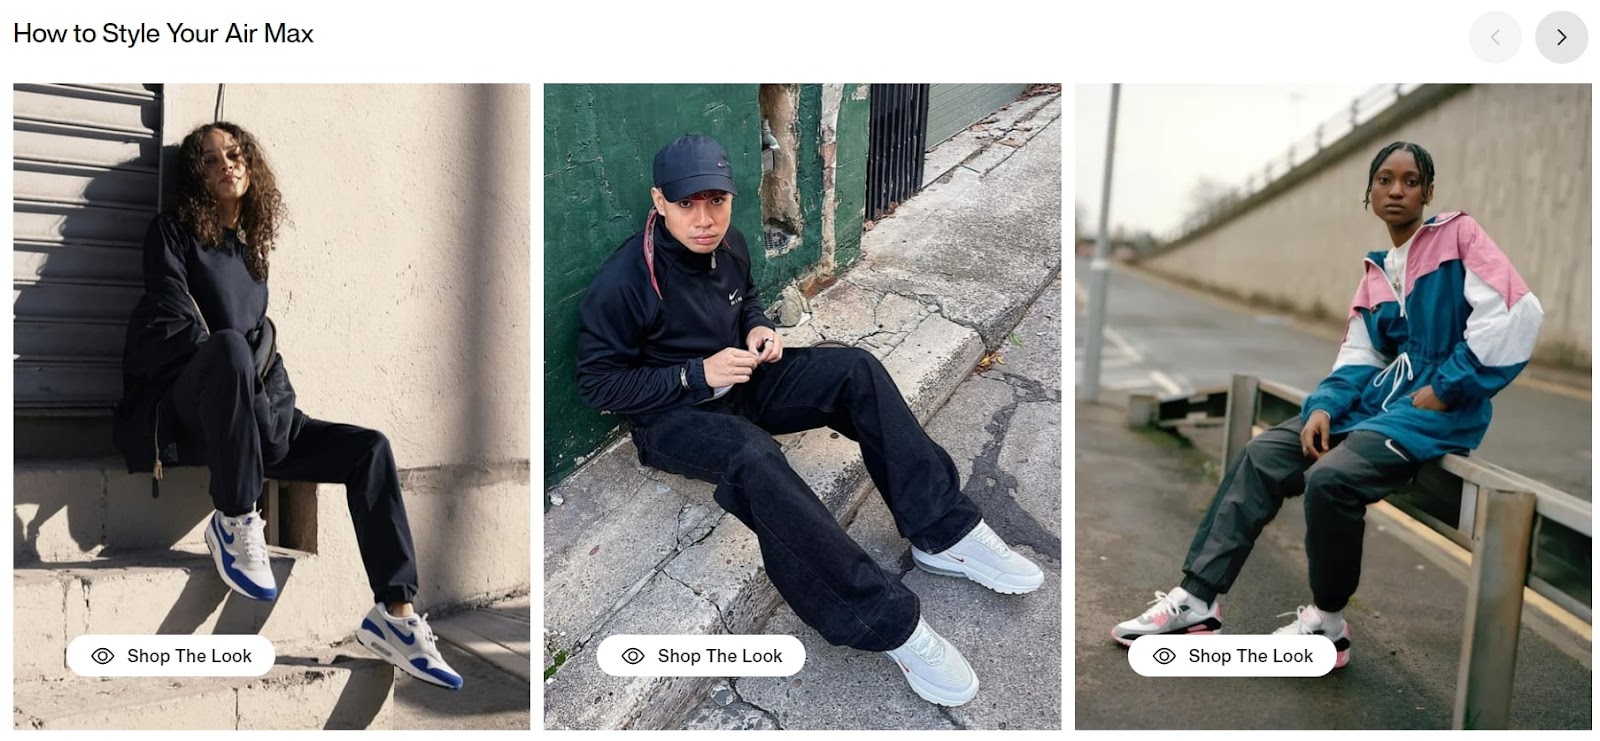 Nike’s page on how to style your Air Max